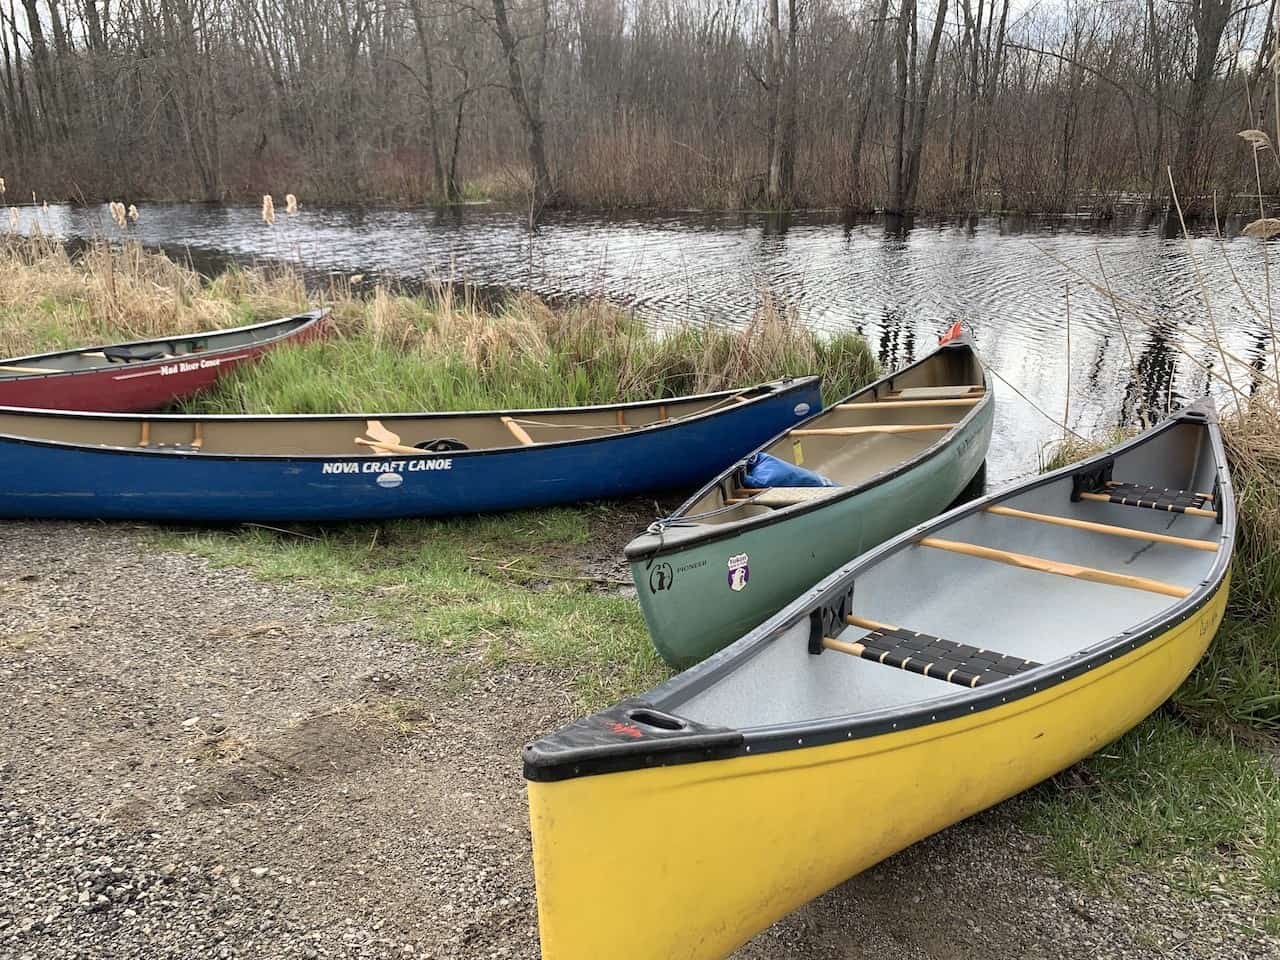 Launching Canoes in the Spencer Creek in Flamborough Ontario Canada - We parked at the side of the road and found a good spot to launch our canoes in the Spencer Creek in Flamborough, Ontario, Canada.